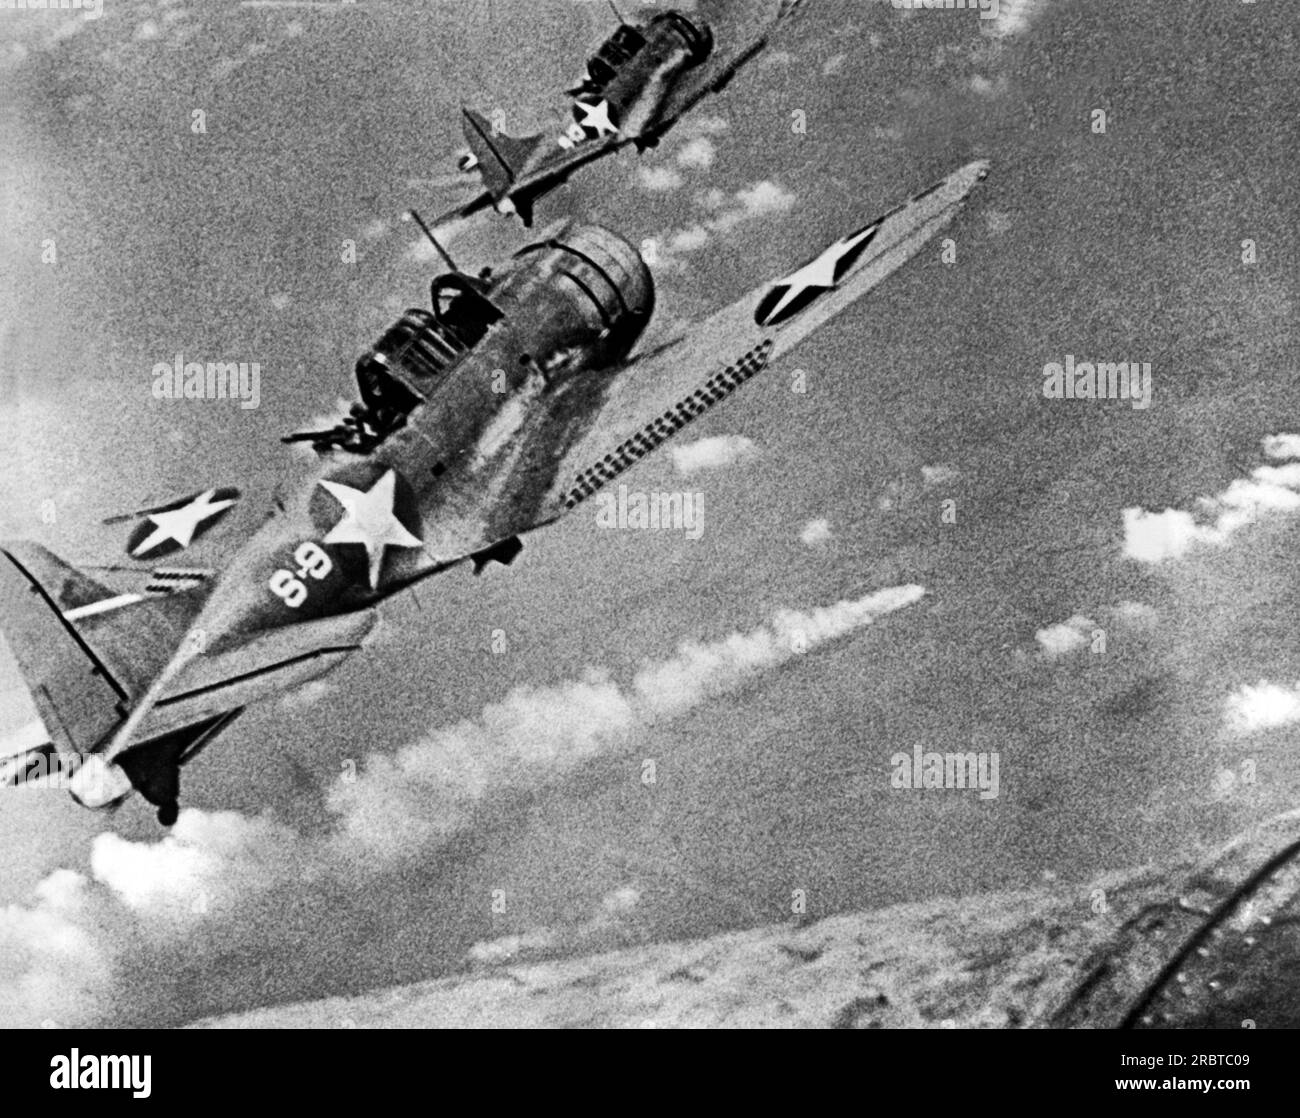 Midway Island,  June, 1942 Two US fighter planes fly over a burning Japanese ship during the Battle of Midway. Stock Photo